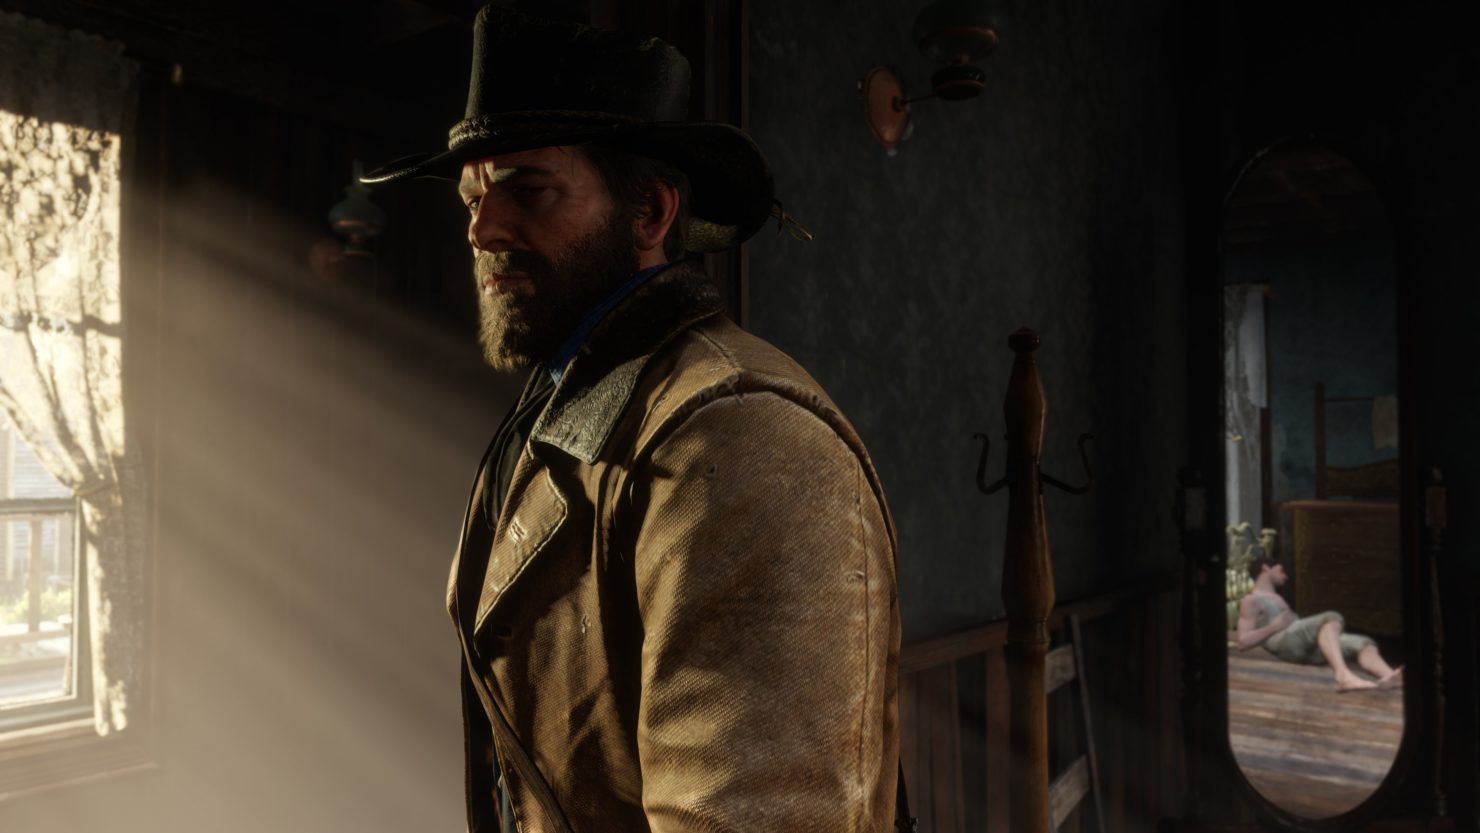 Who needs Red Dead Redemption 2? Here are the best western games on PC